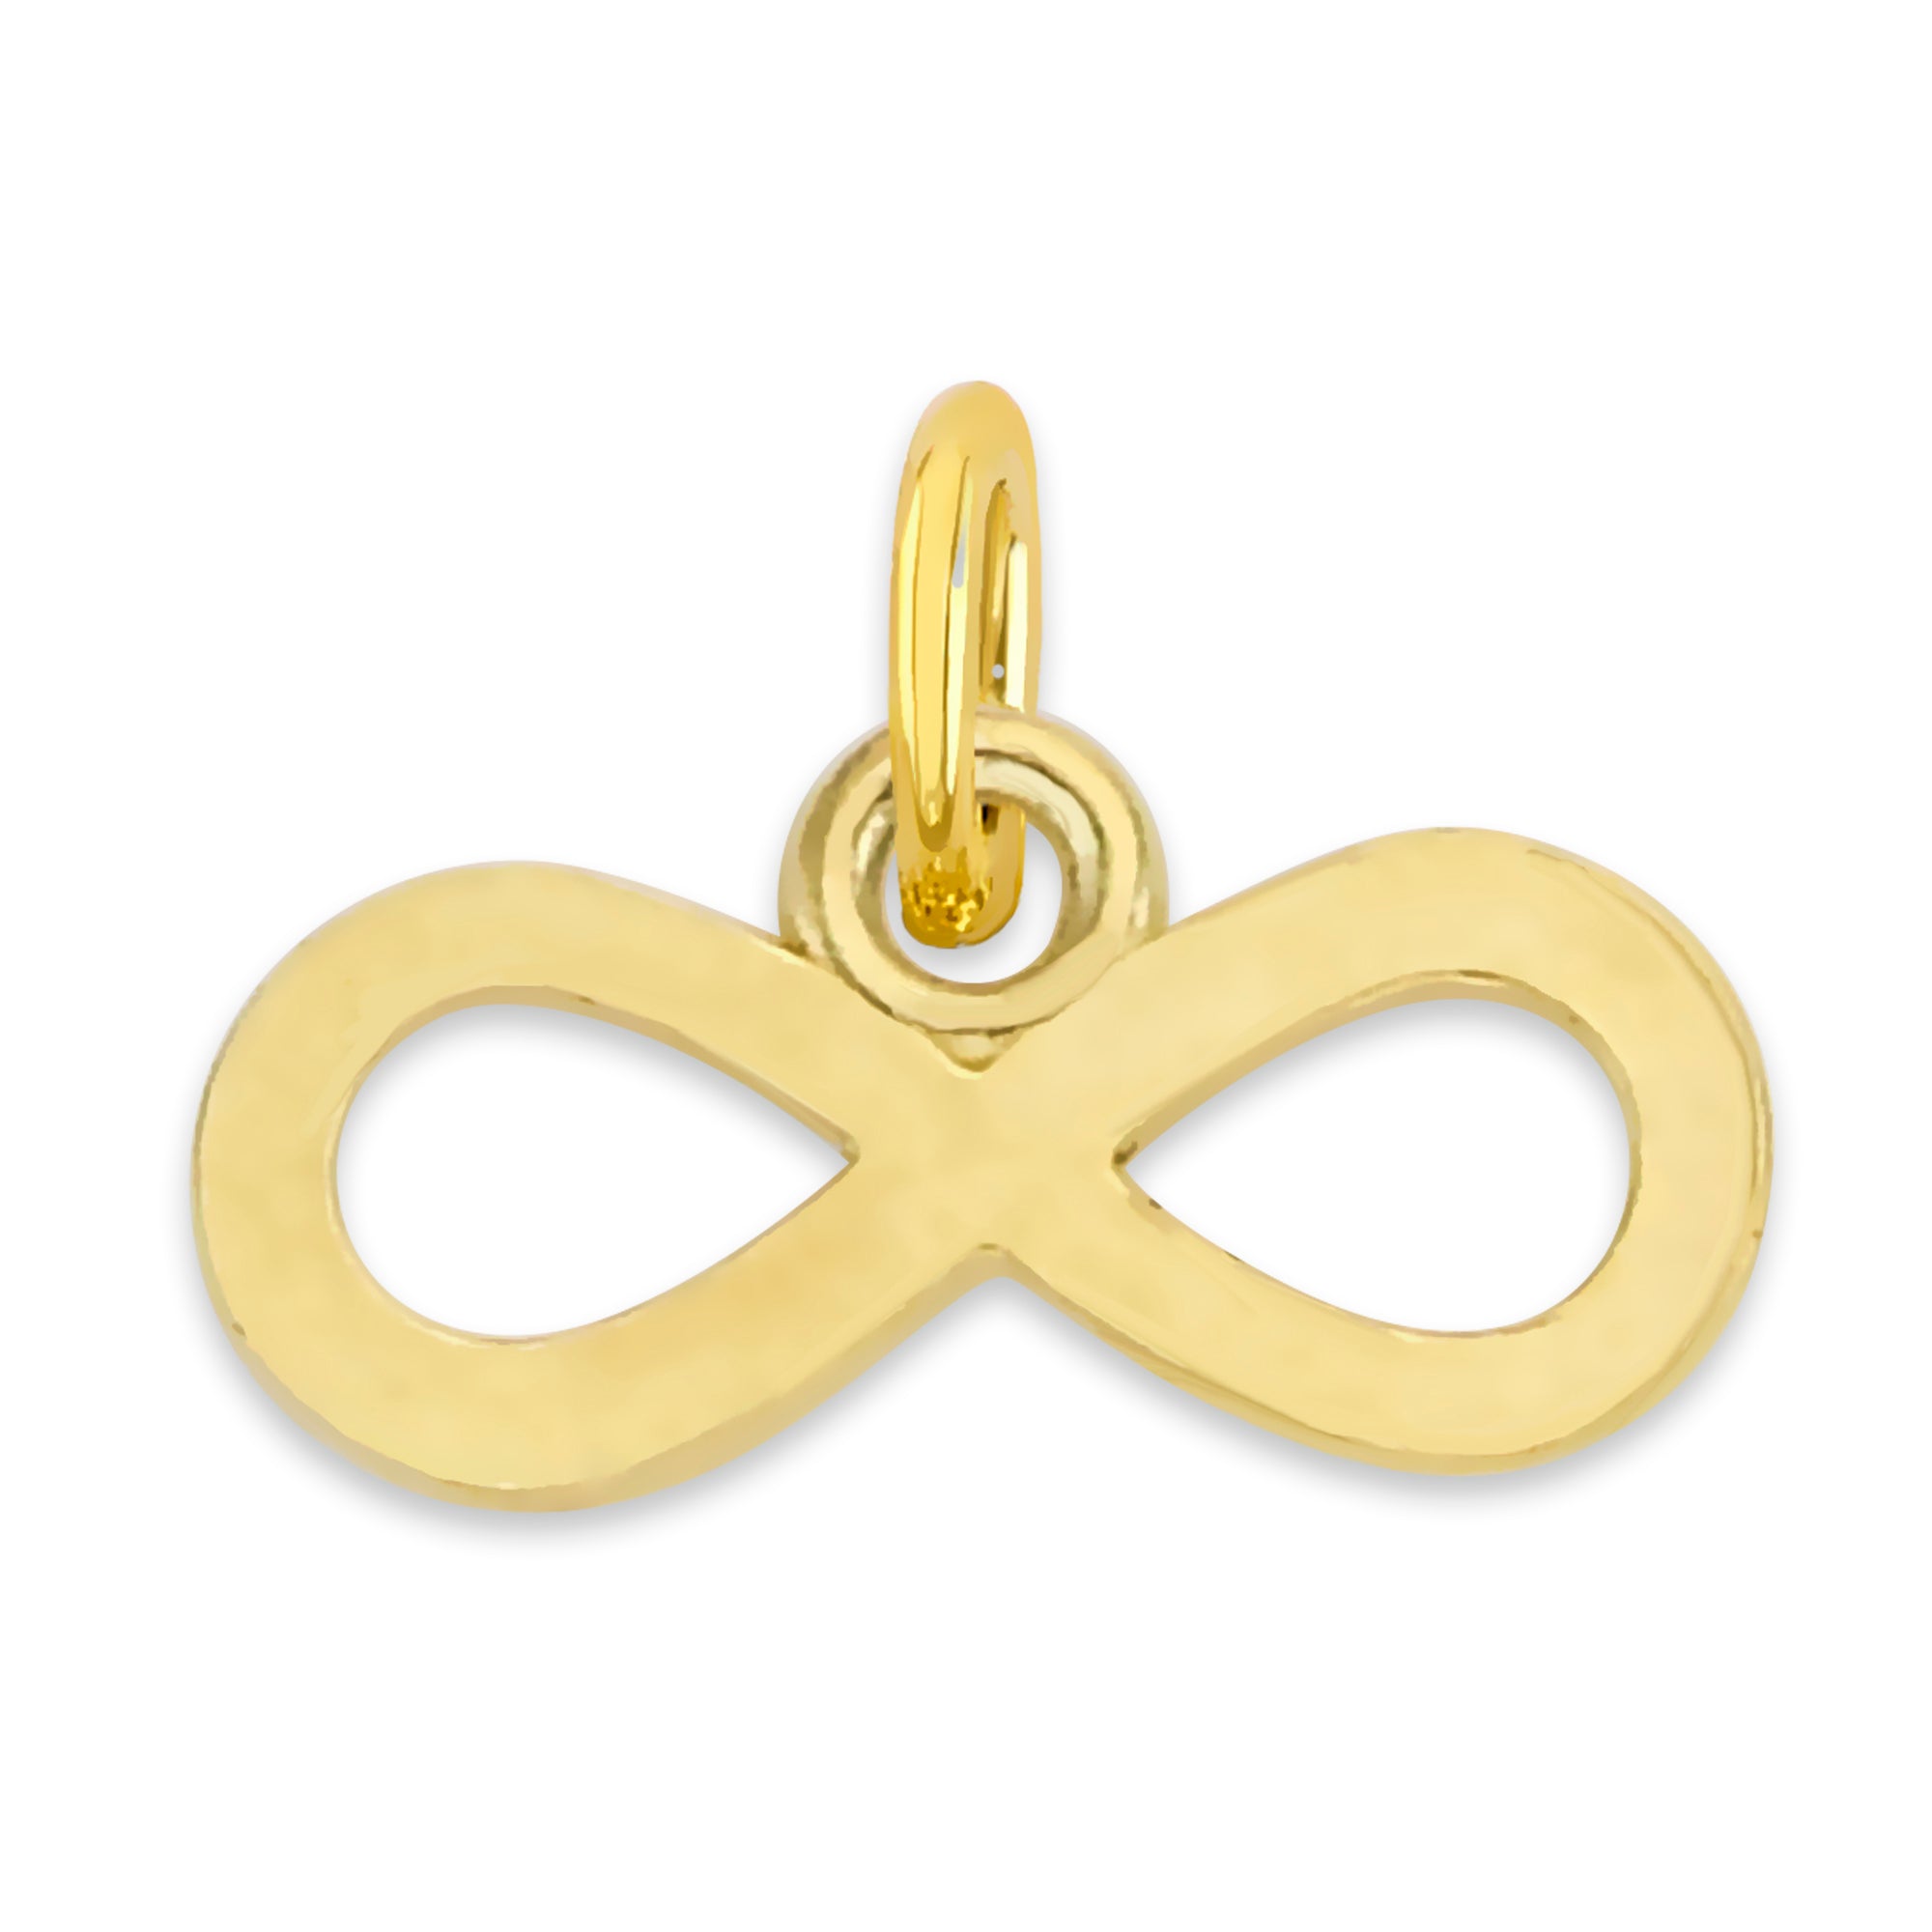 Solid Gold Infinity Charm - 10k or 14k